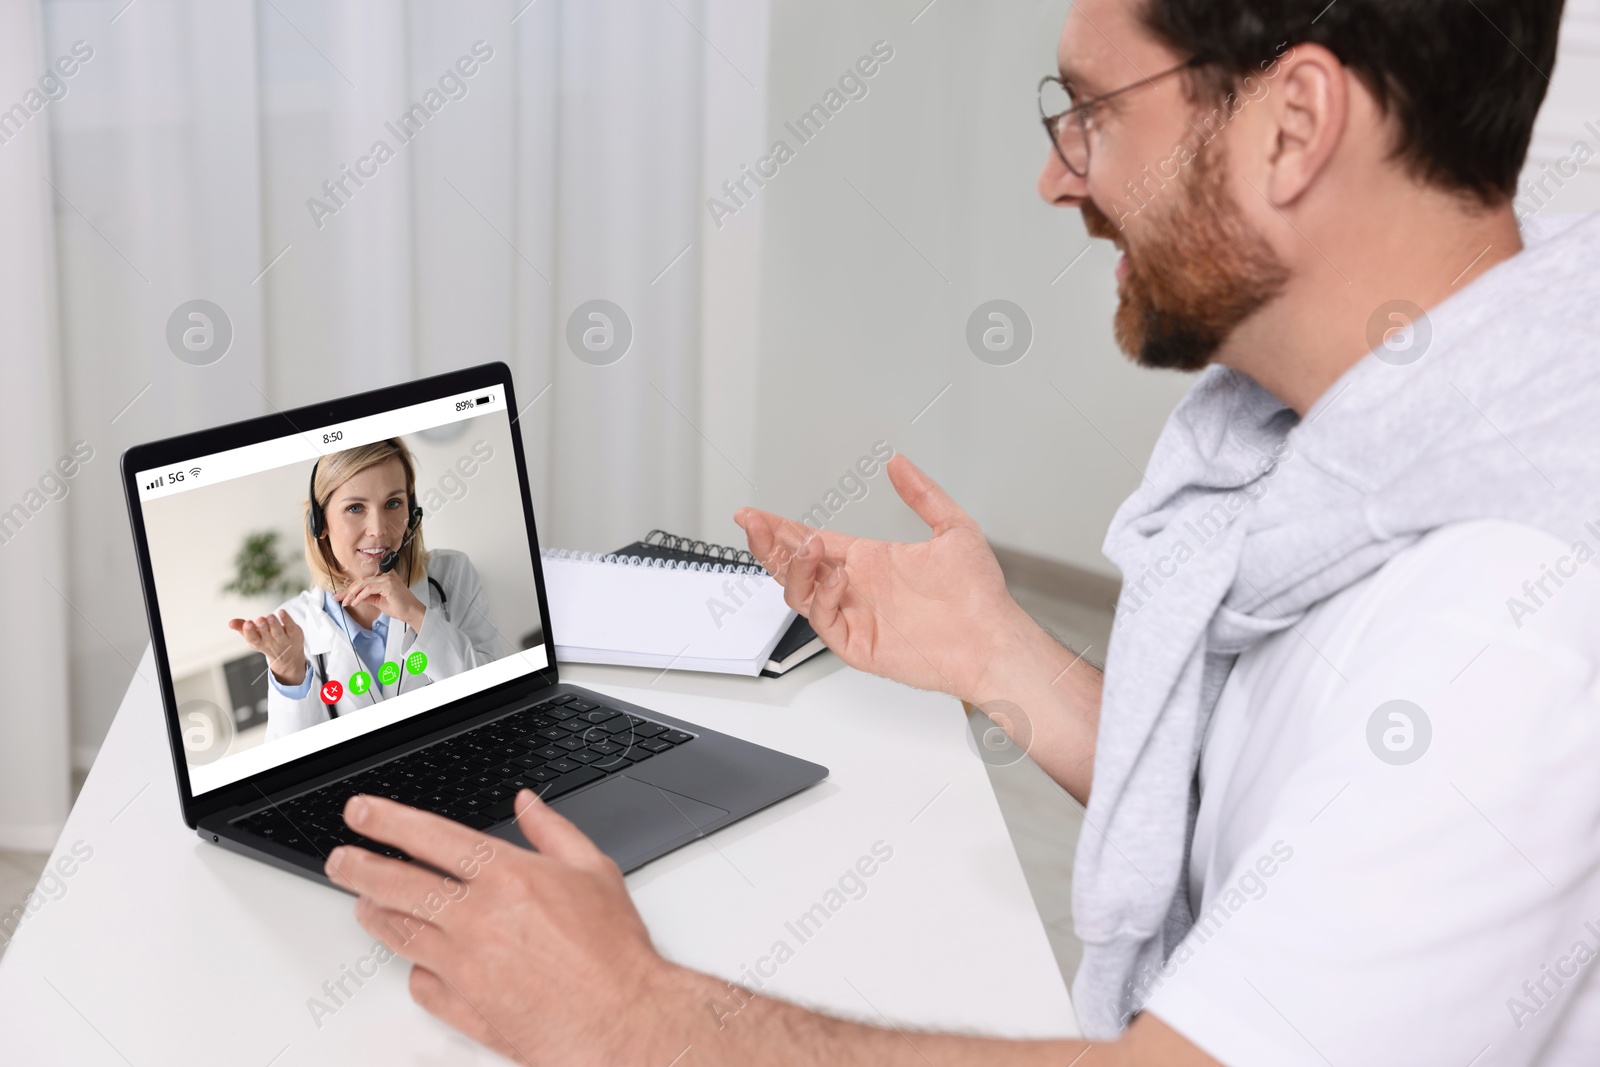 Image of Online medical consultation. Man having video chat with doctor via laptop at table indoors